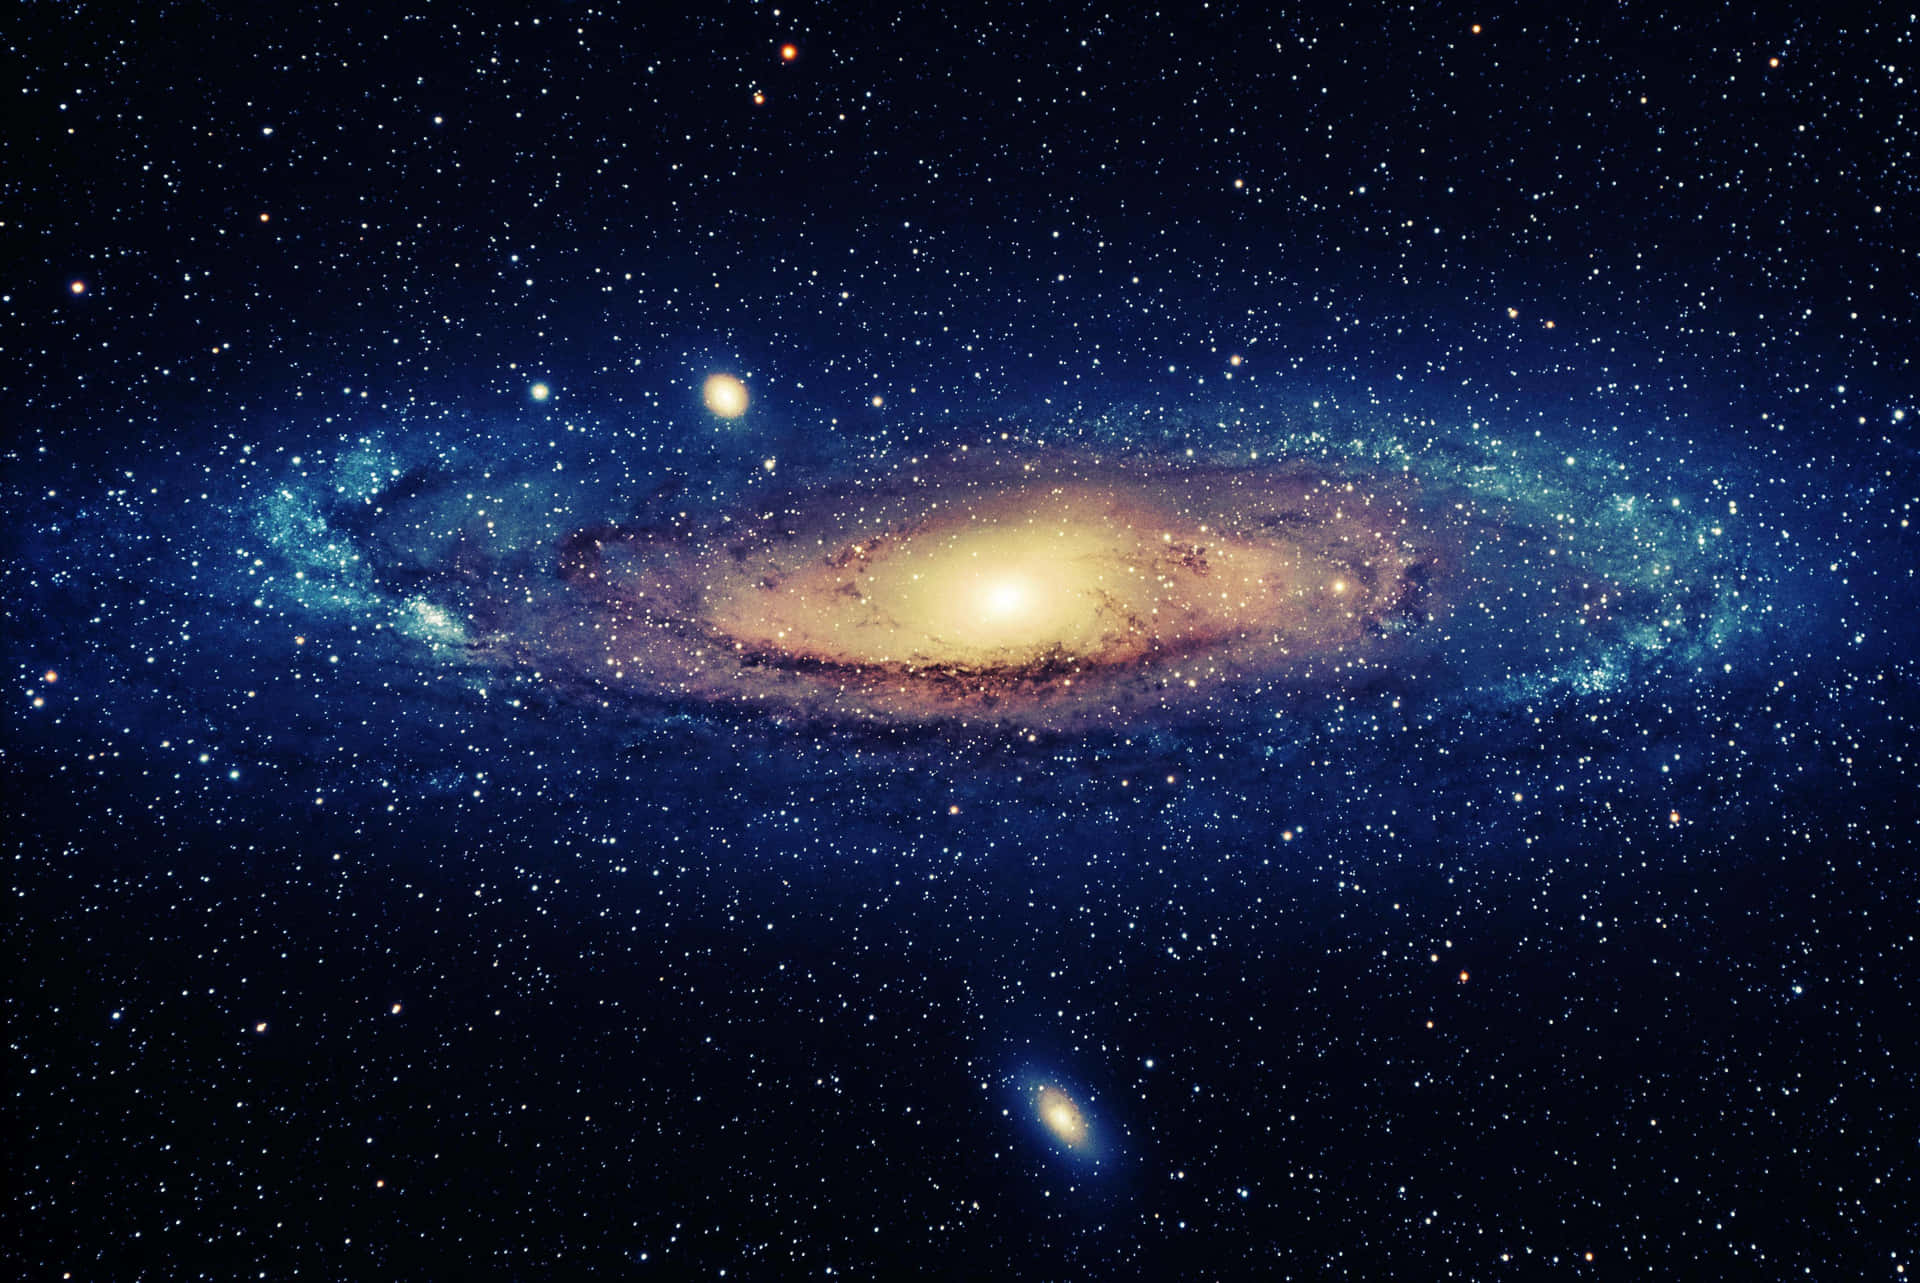 Get Lost in the Beauty of Our Nearest Galactic Neighbor - Andromeda Galaxy 4K Wallpaper